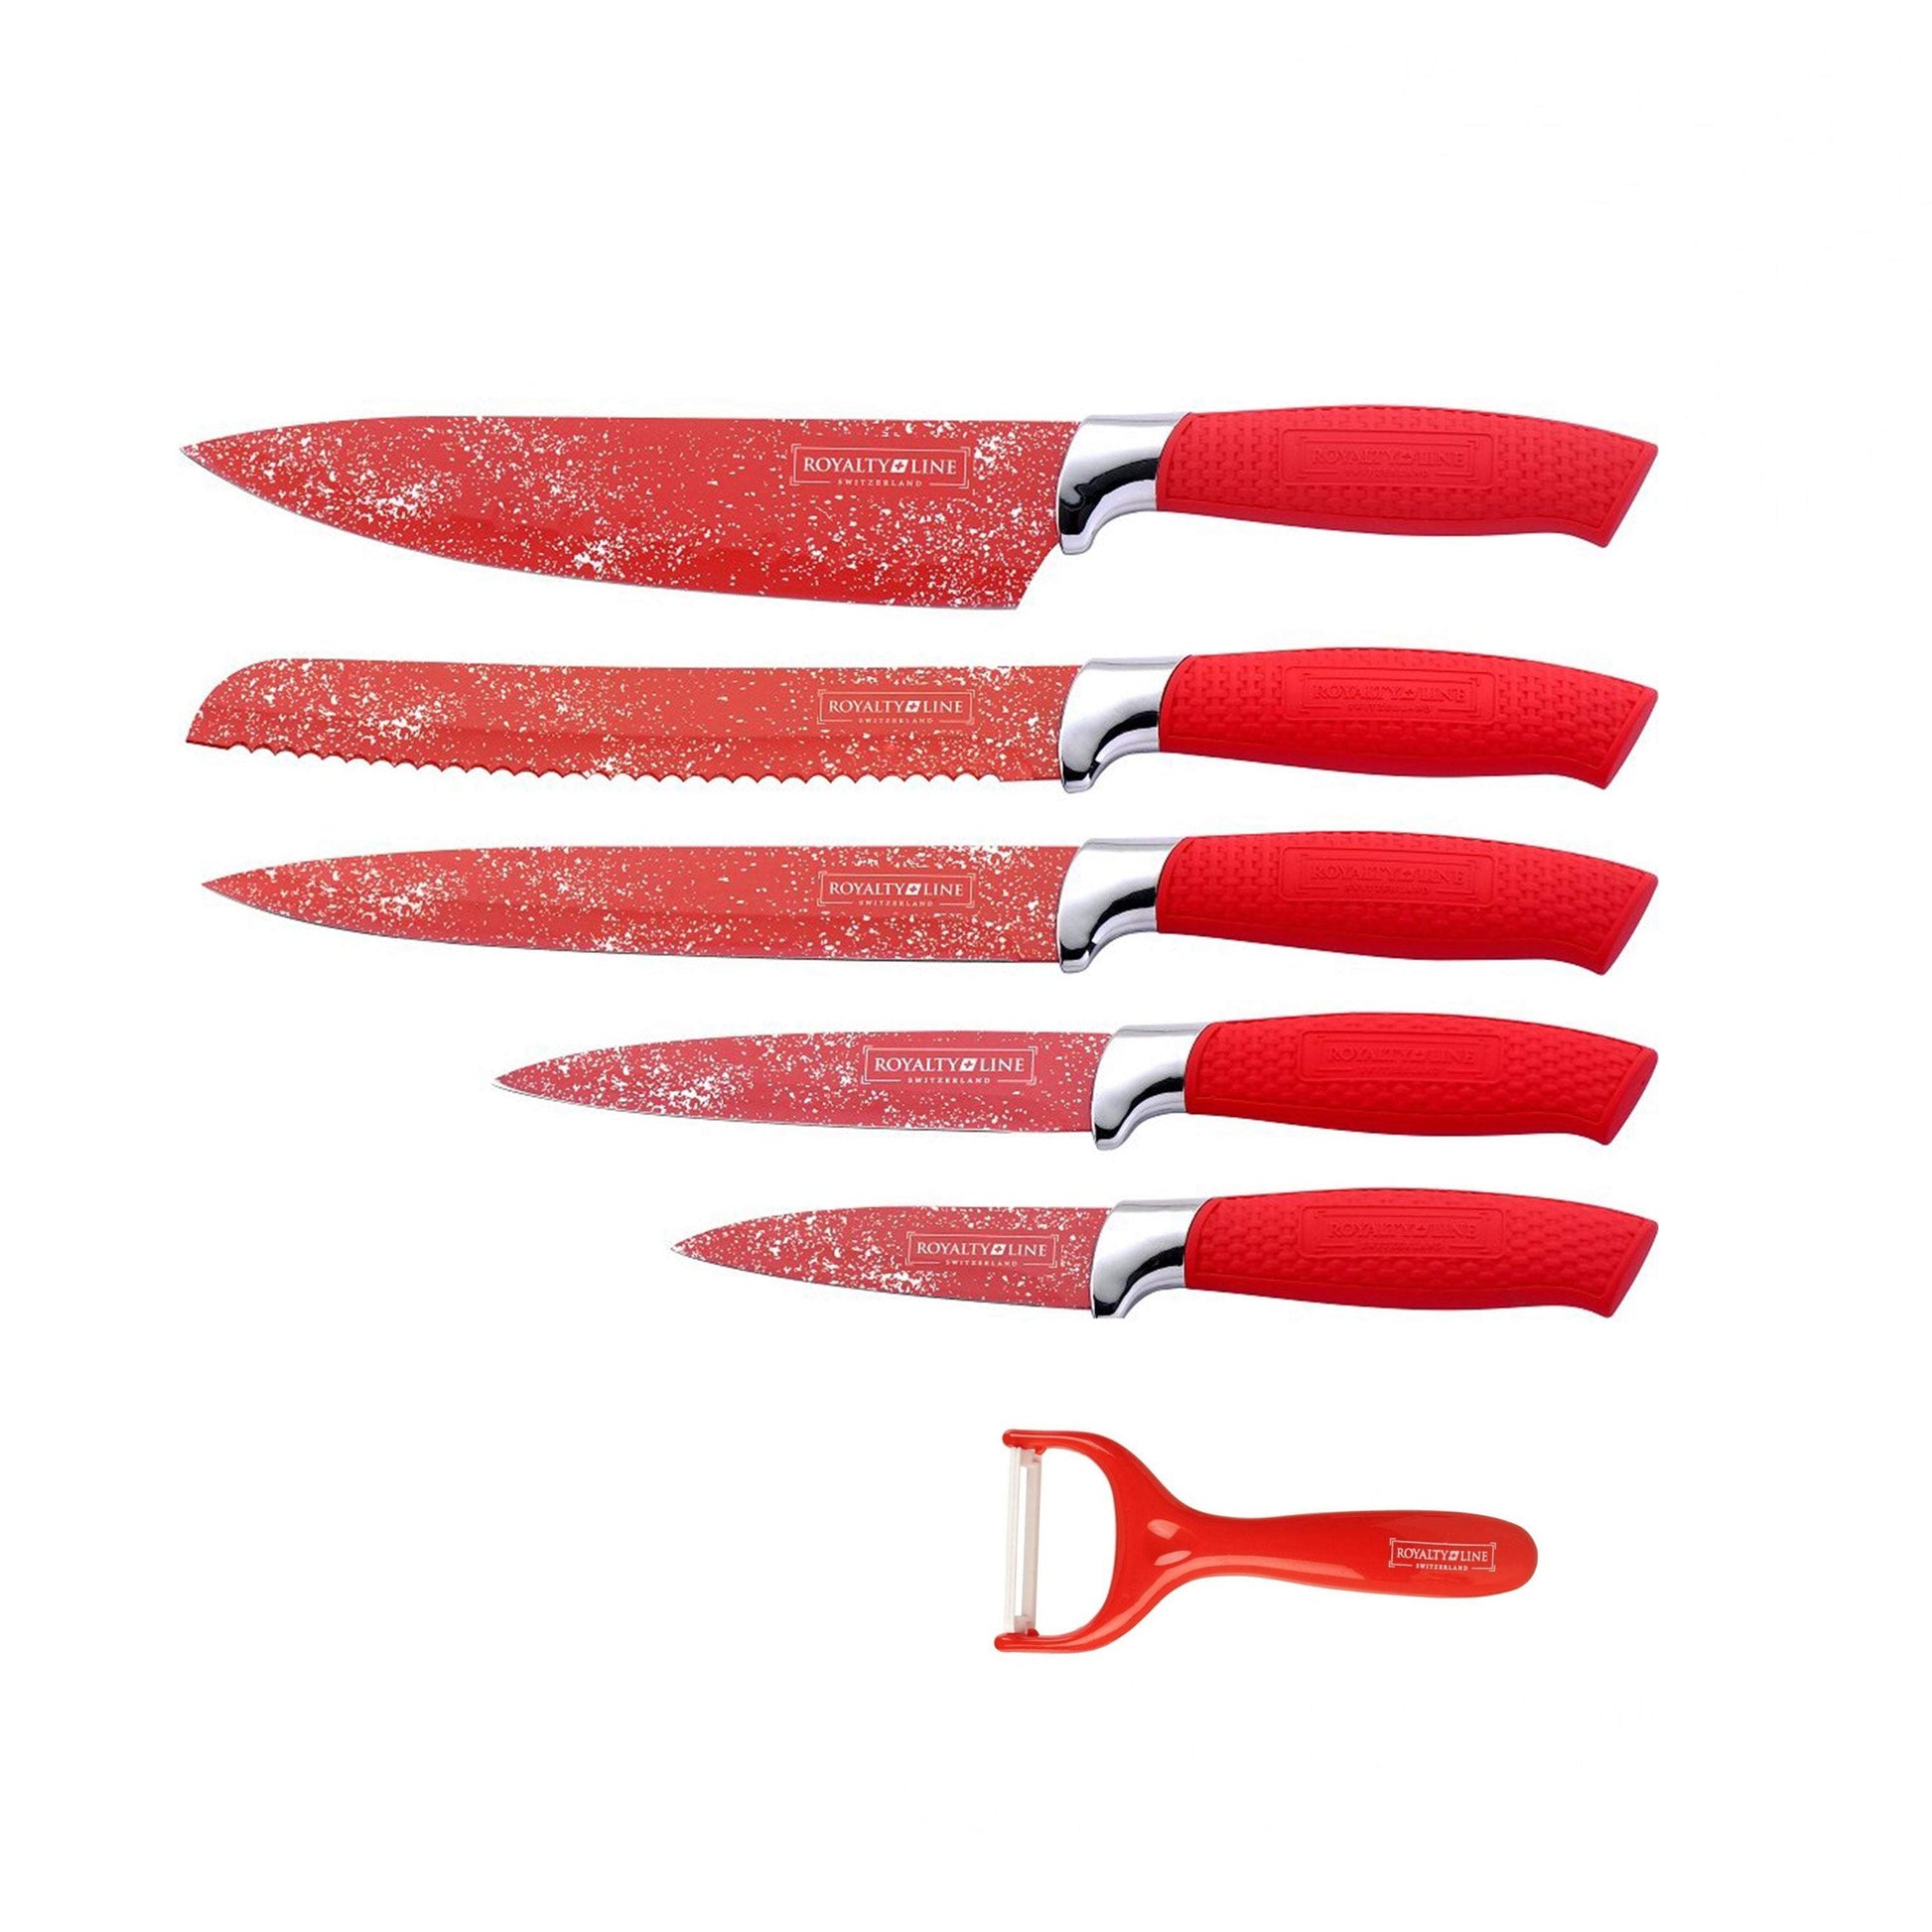 5 Royalty Line KNIFE SET WITH NON-STICK COATING + CLEAVER-Royal Brands Co-